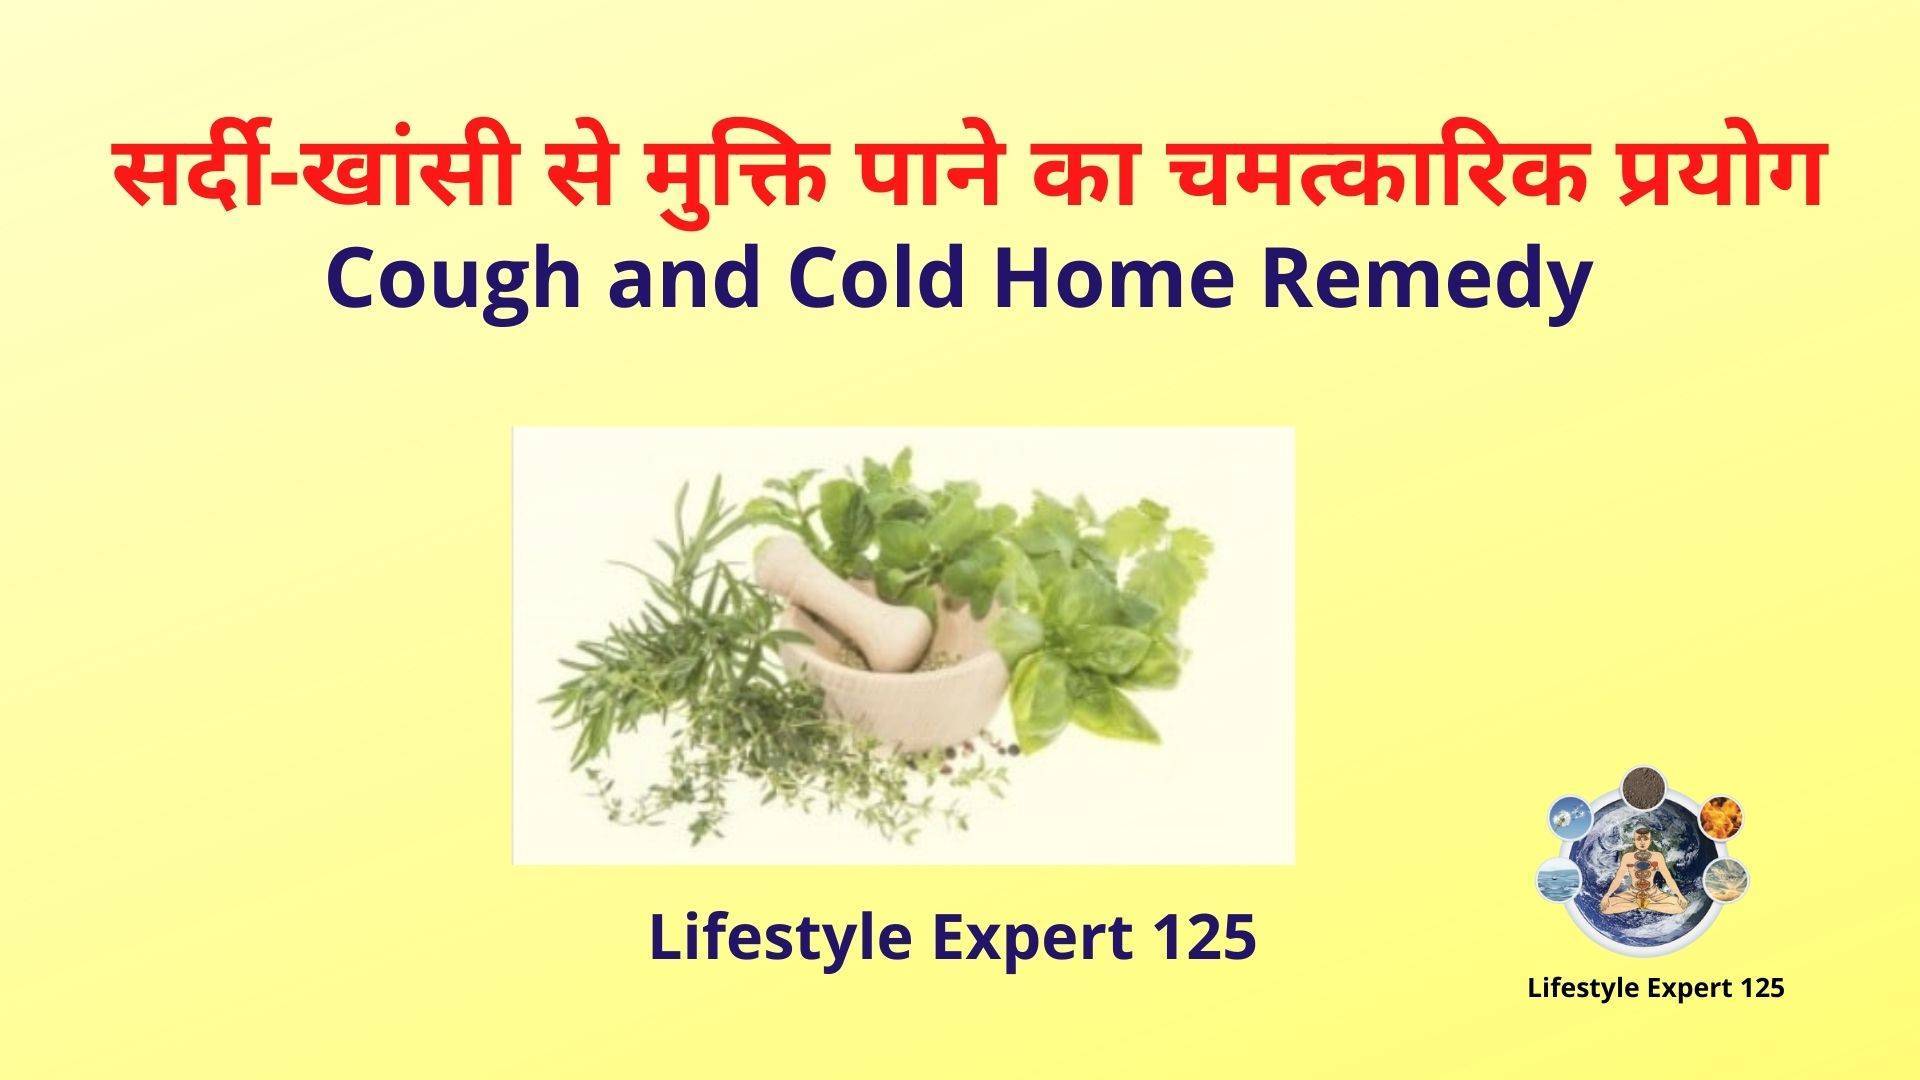 How to Cure Cold and Cough in One Day: